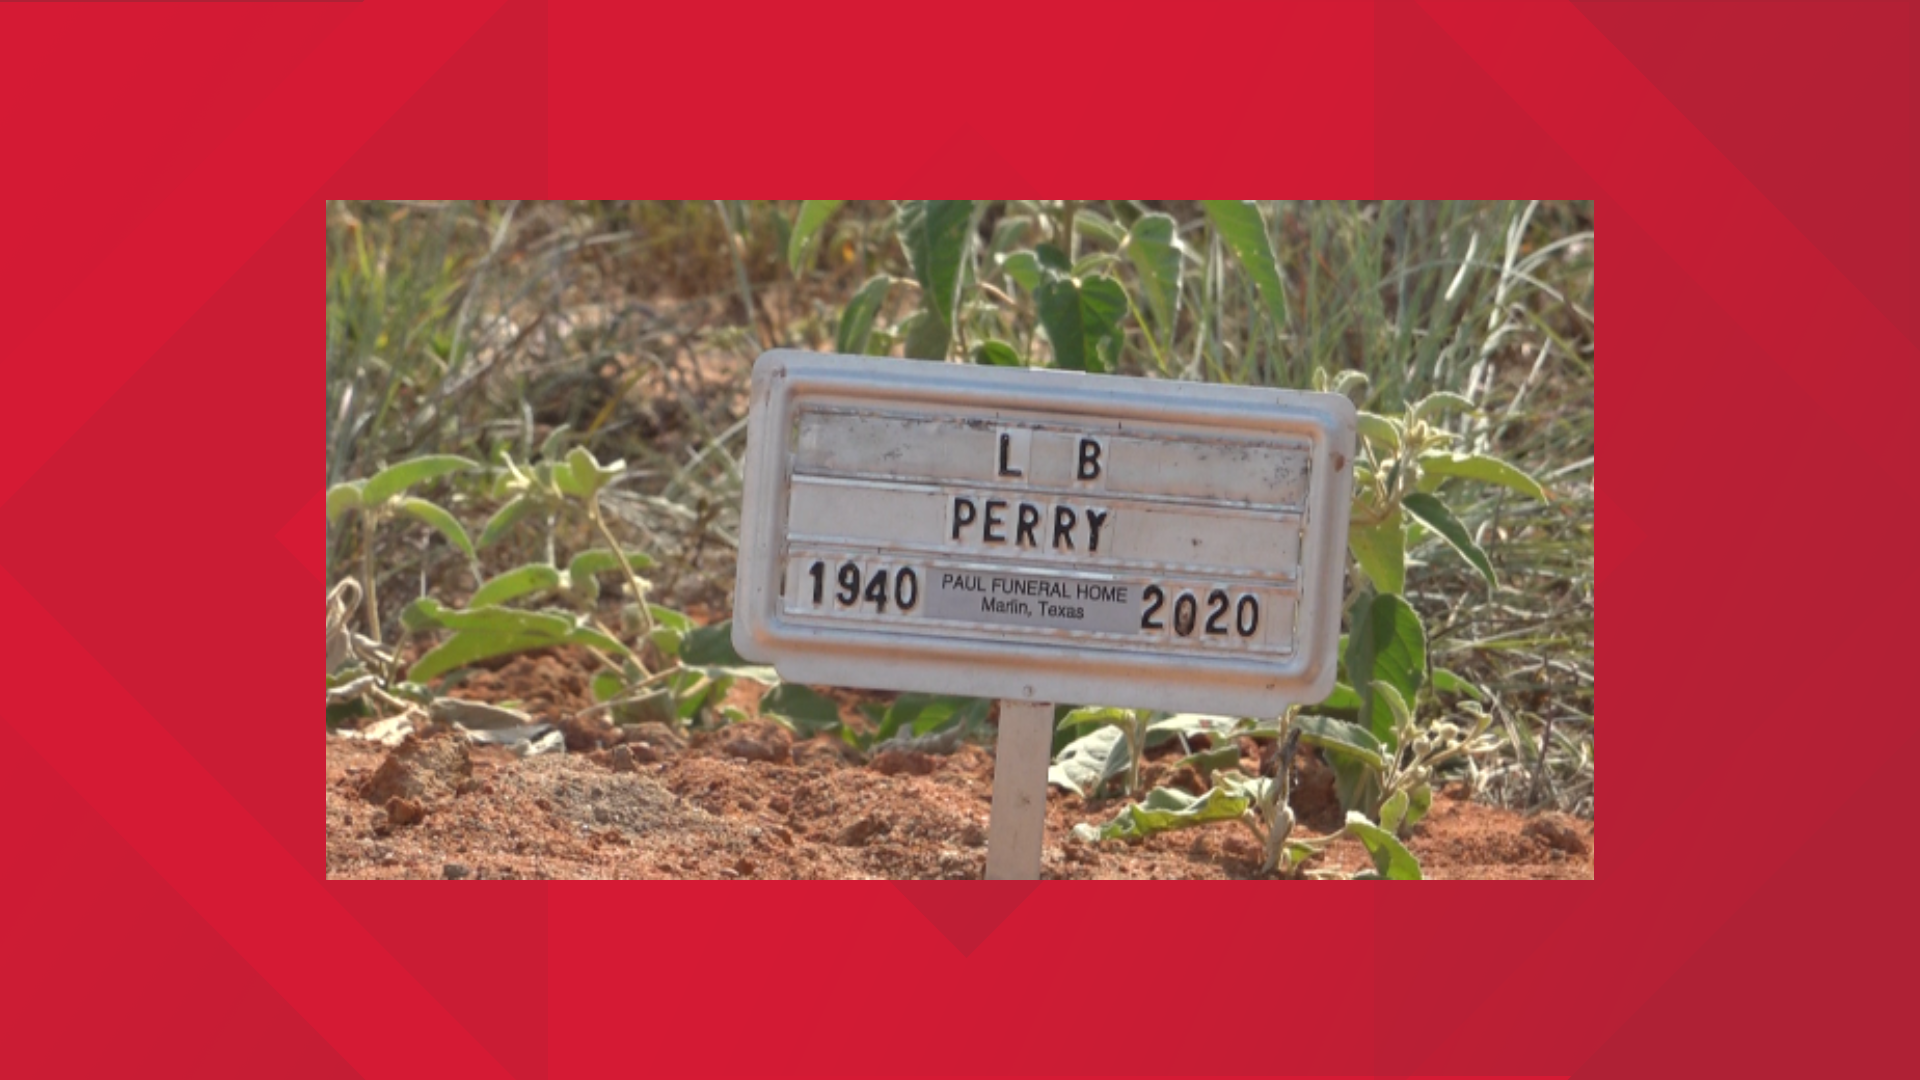 The Sheriff's Department received a call about a 'disturbed grave' at the Shady Grove Cemetary in Kosse Monday morning. The grave longs to Reverend LB Perry.